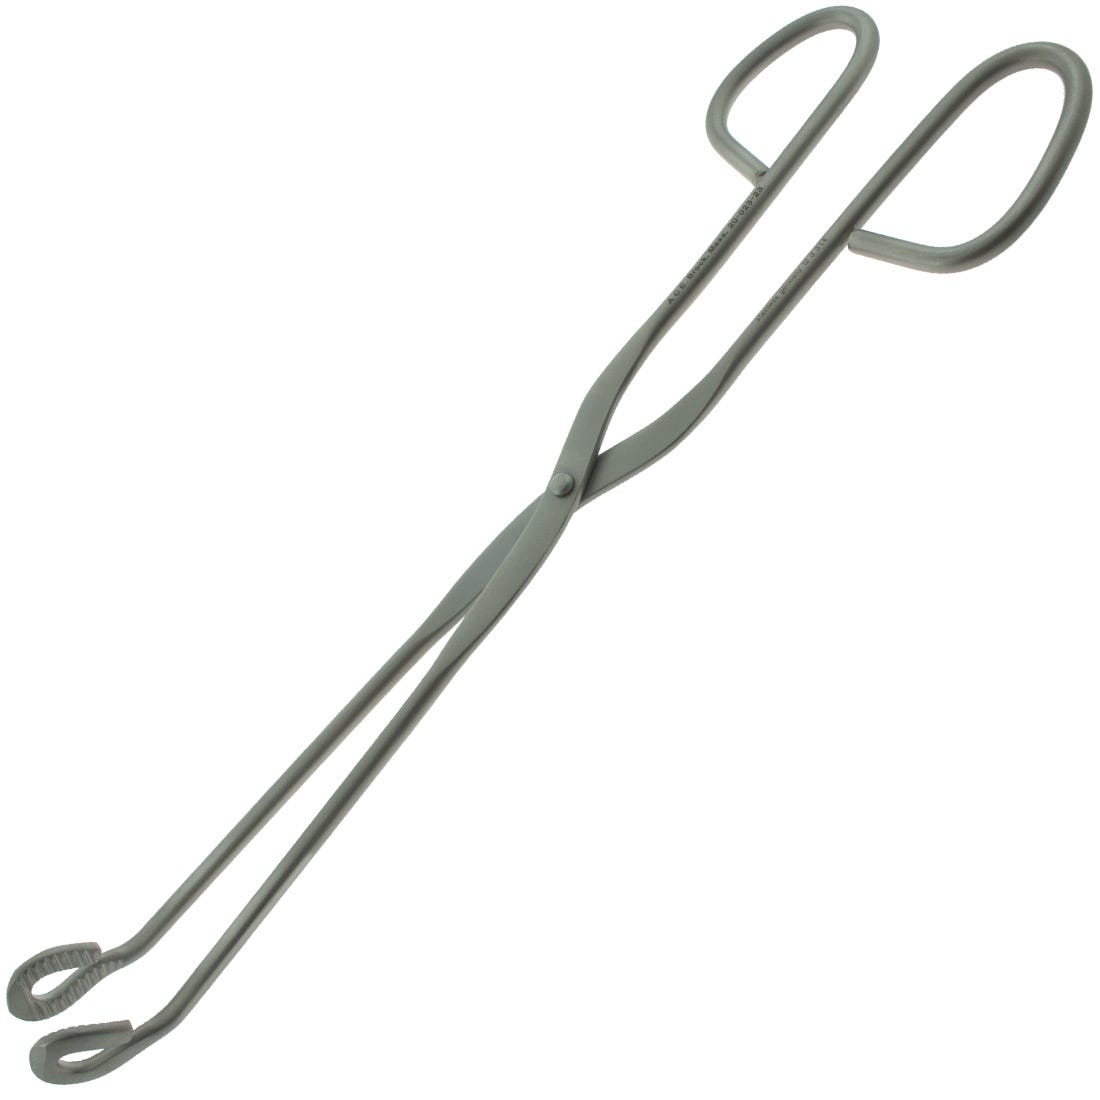 ACE Universal Sterilizing Forceps, Curved, 11", 28cm